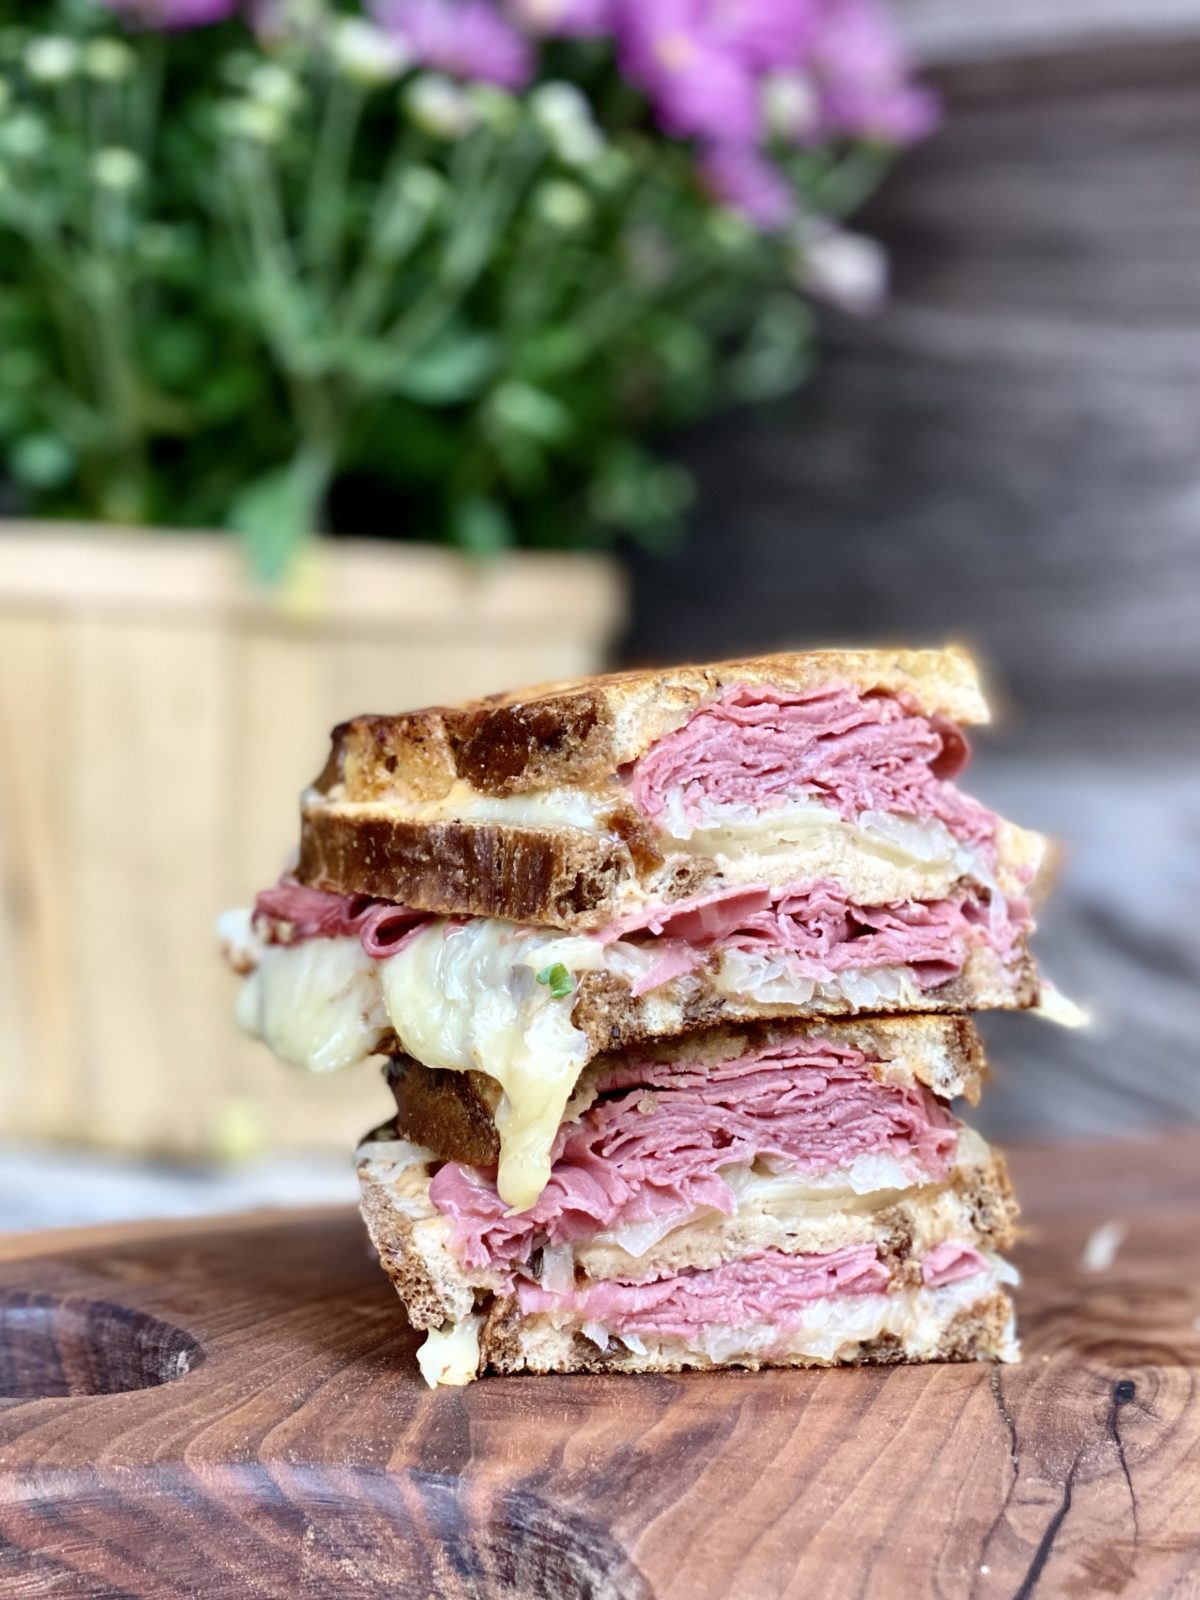 Russian Dressing Recipe for a Reuben and more • Curious Cuisiniere